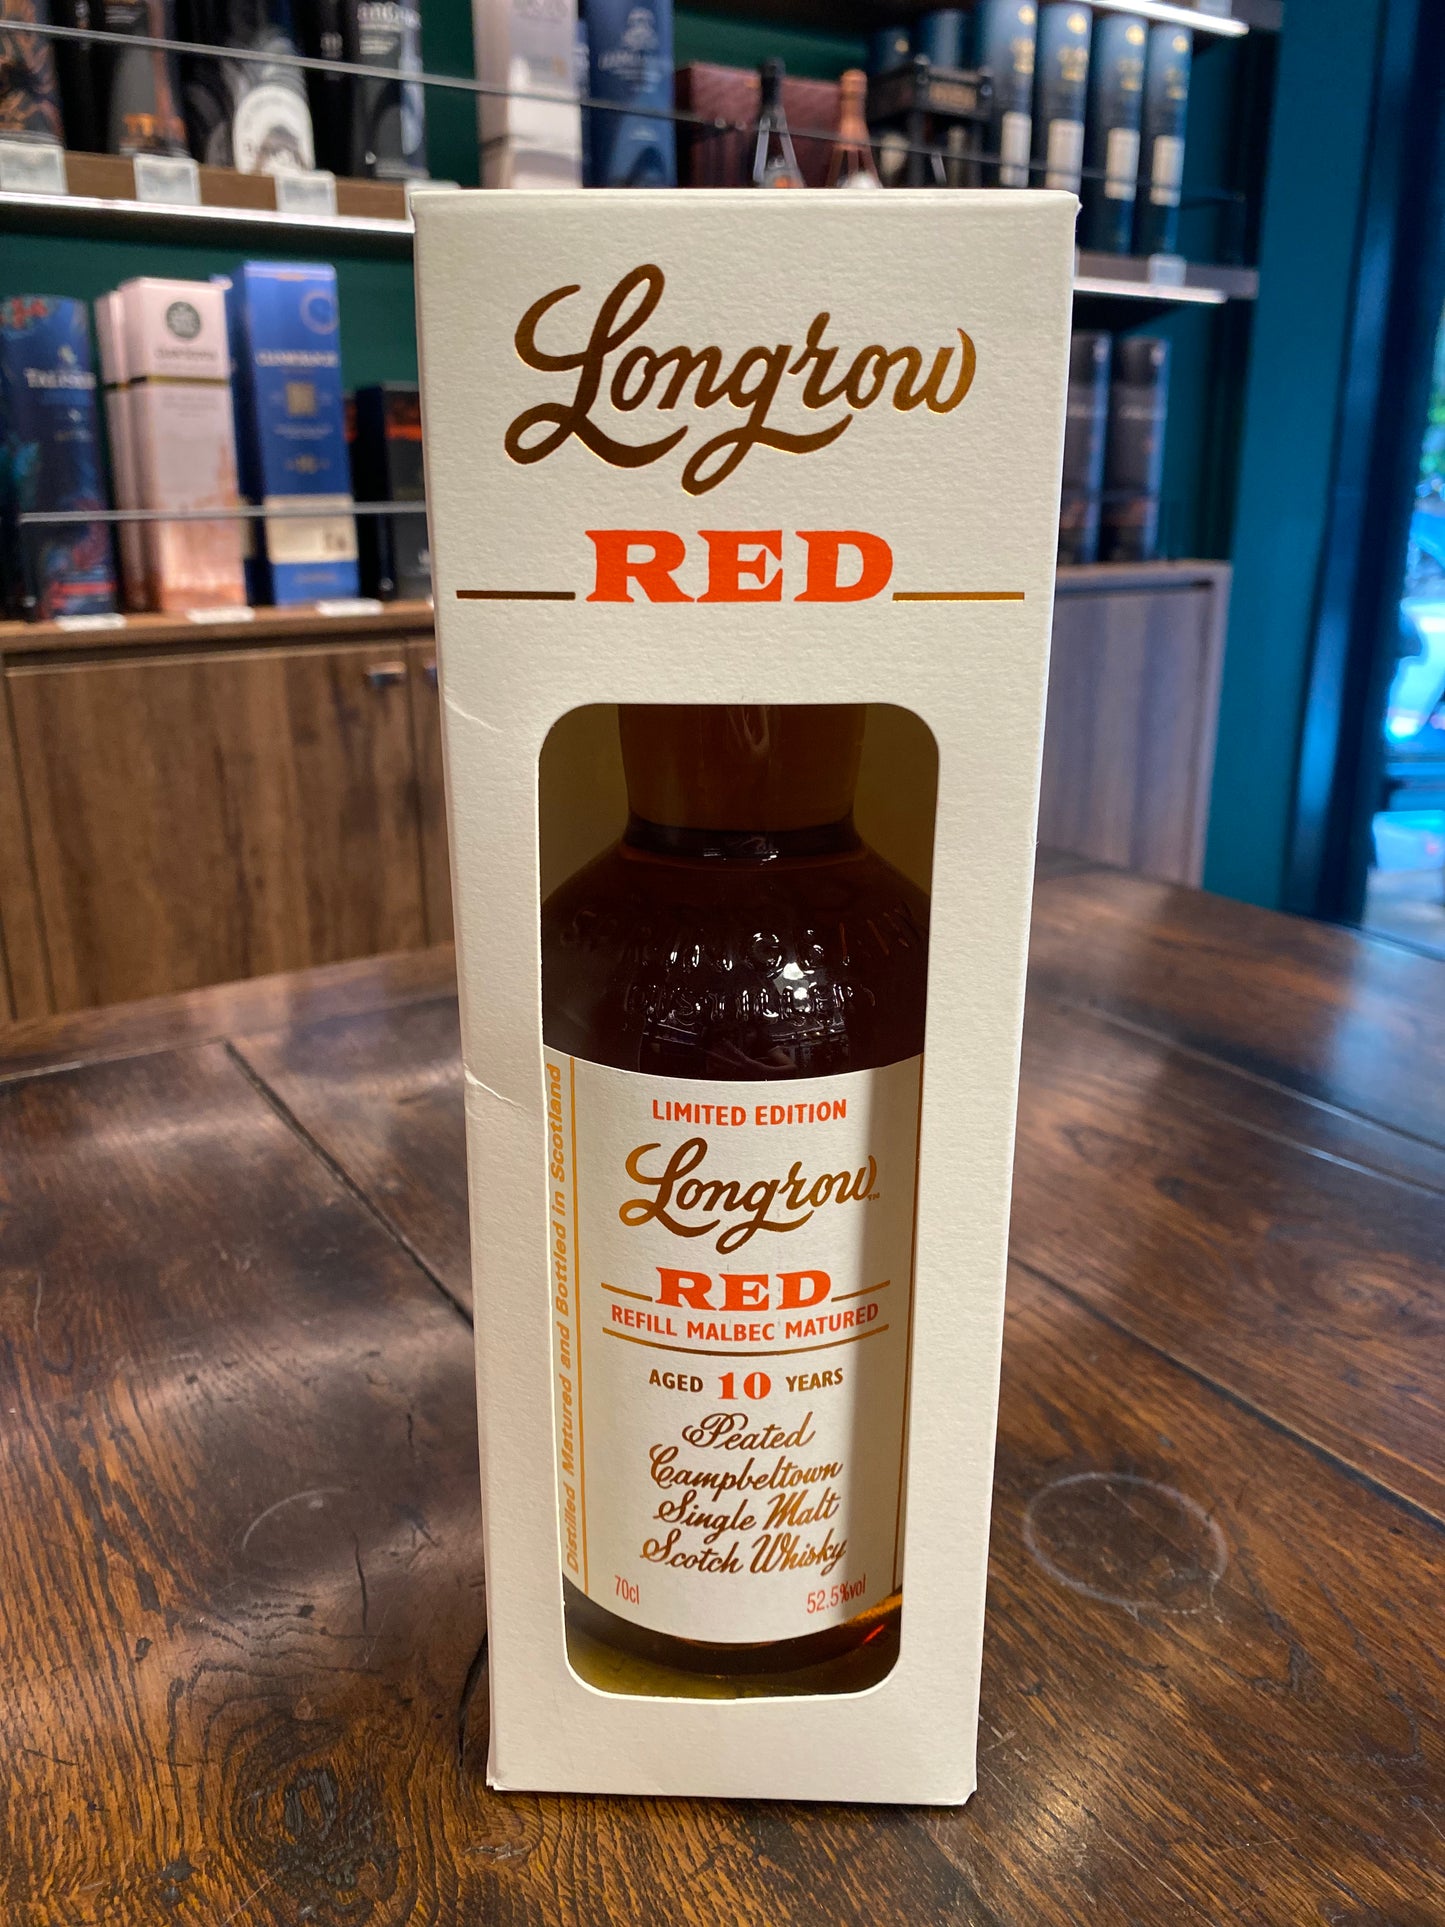 Longrow 'Red' Limited Edition Malbec Cask Matured Peated 10 Year Old Single Malt Scotch Whisky,700ml,52.5%